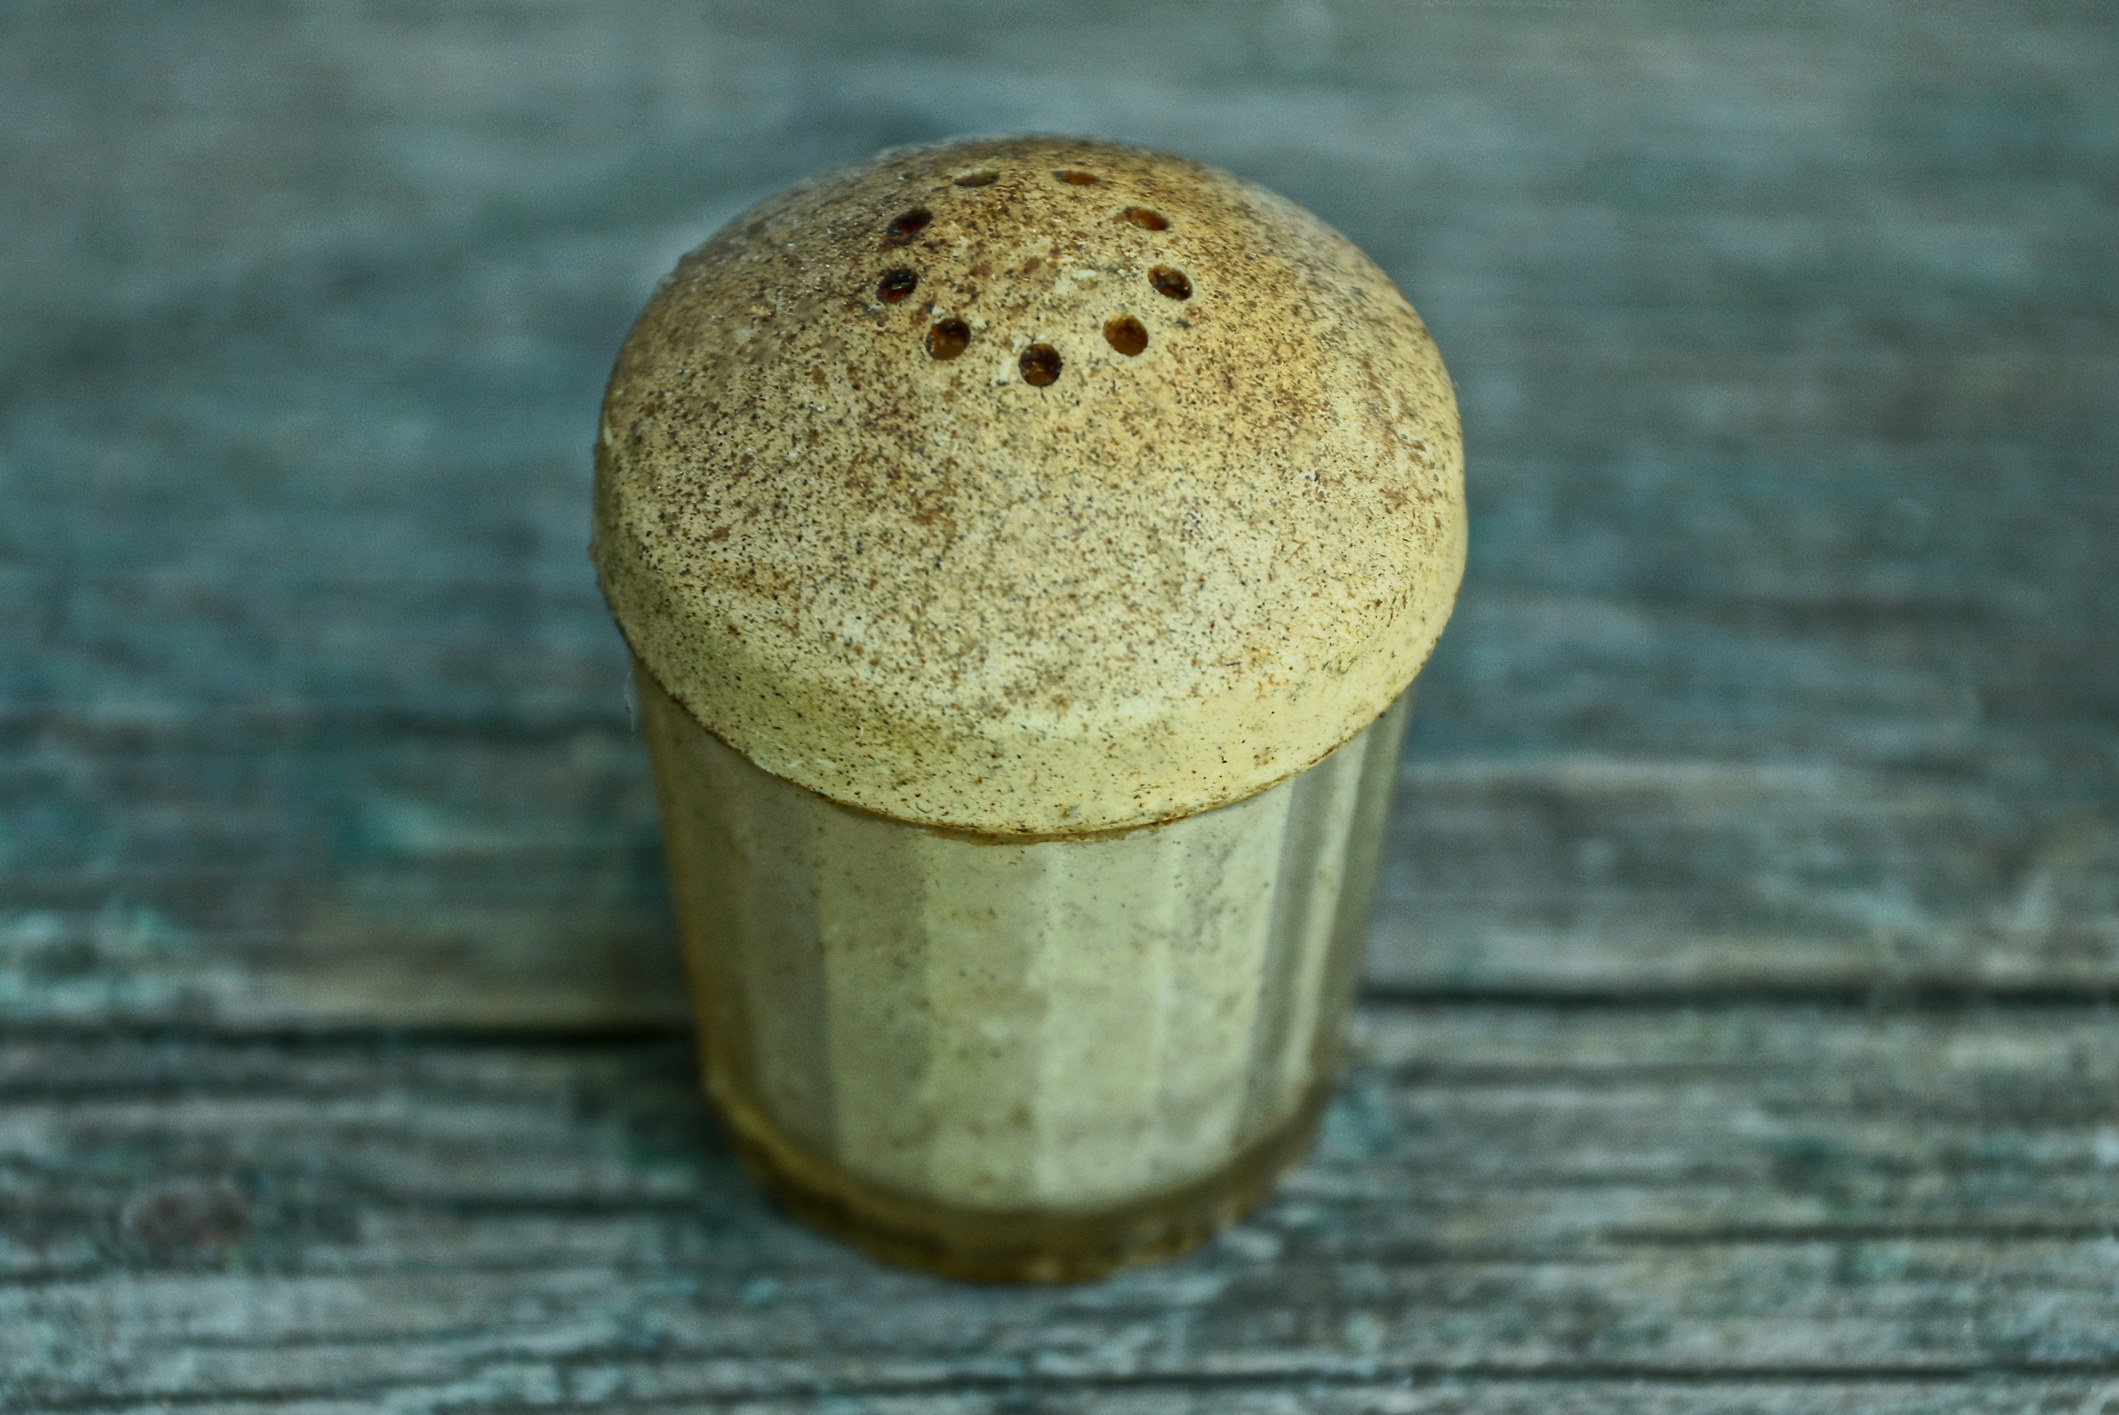 Close-up of a rustic, vintage salt shaker with a metal lid, placed on a textured wooden surface